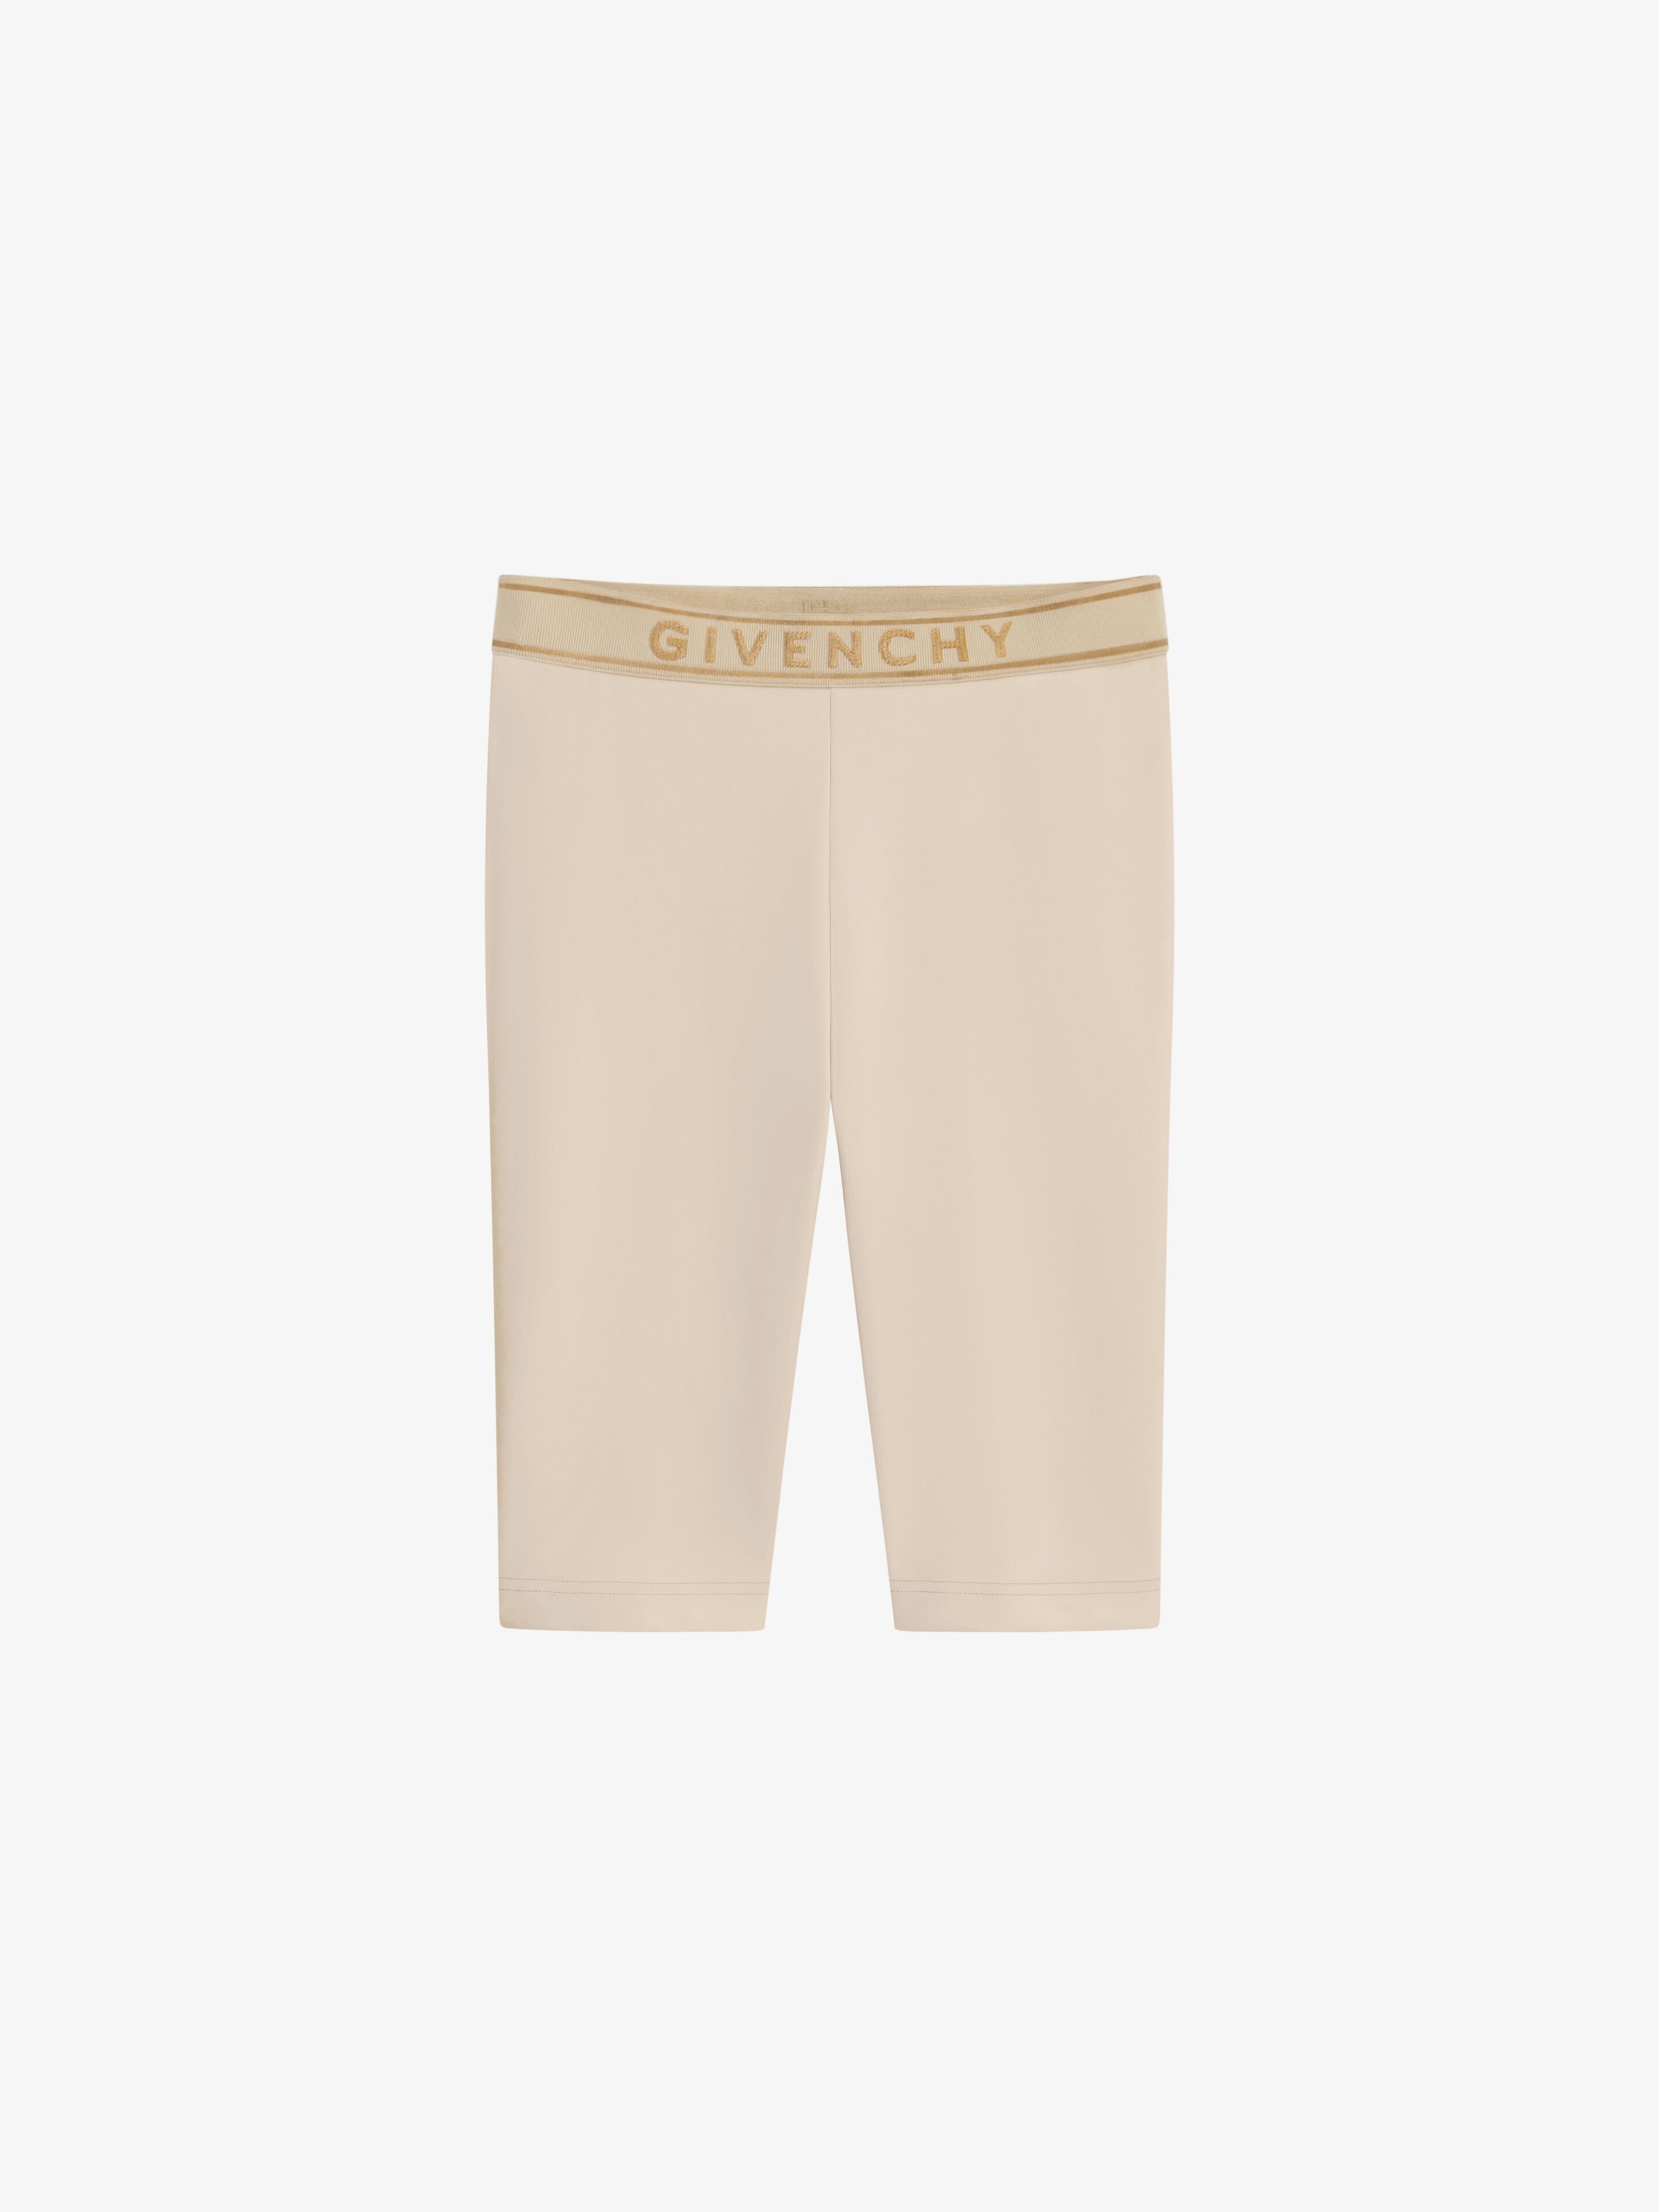 CYCLING SHORTS IN STRETCH JERSEY WITH GIVENCHY 4G BELT - 1